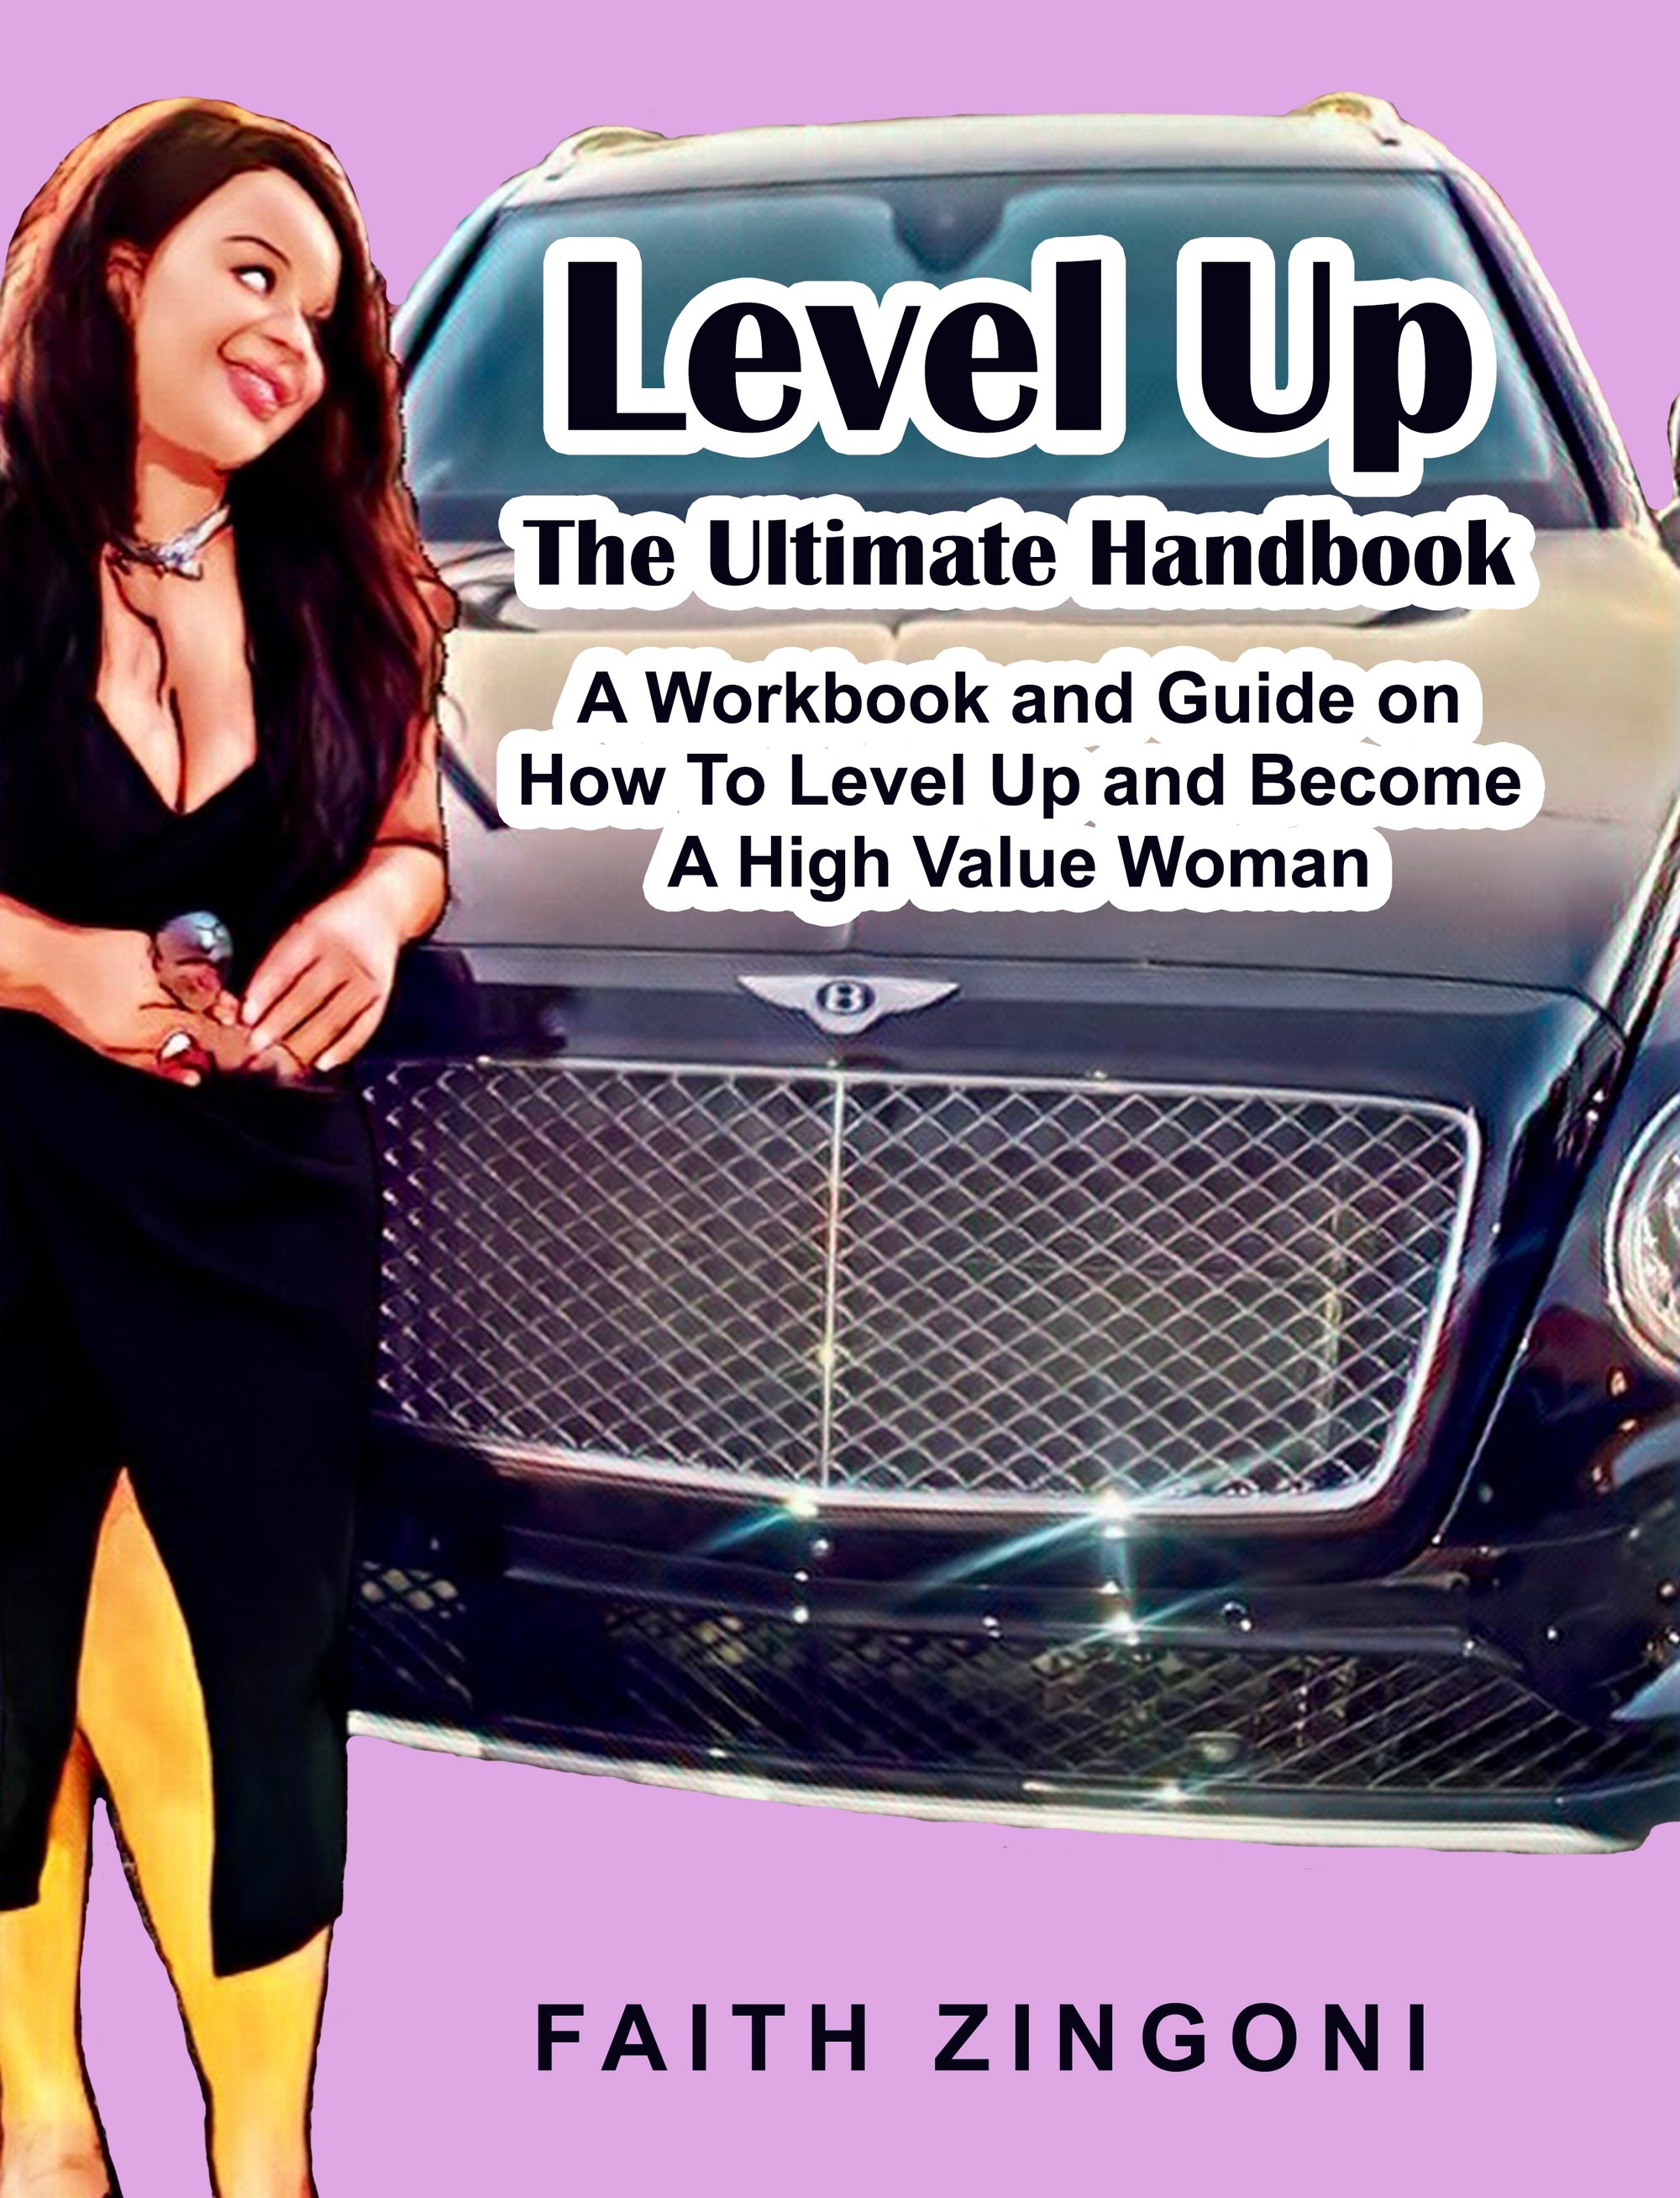 Level Up The Ultimate Handbook by Faith Zingoni (Signed Paperback)